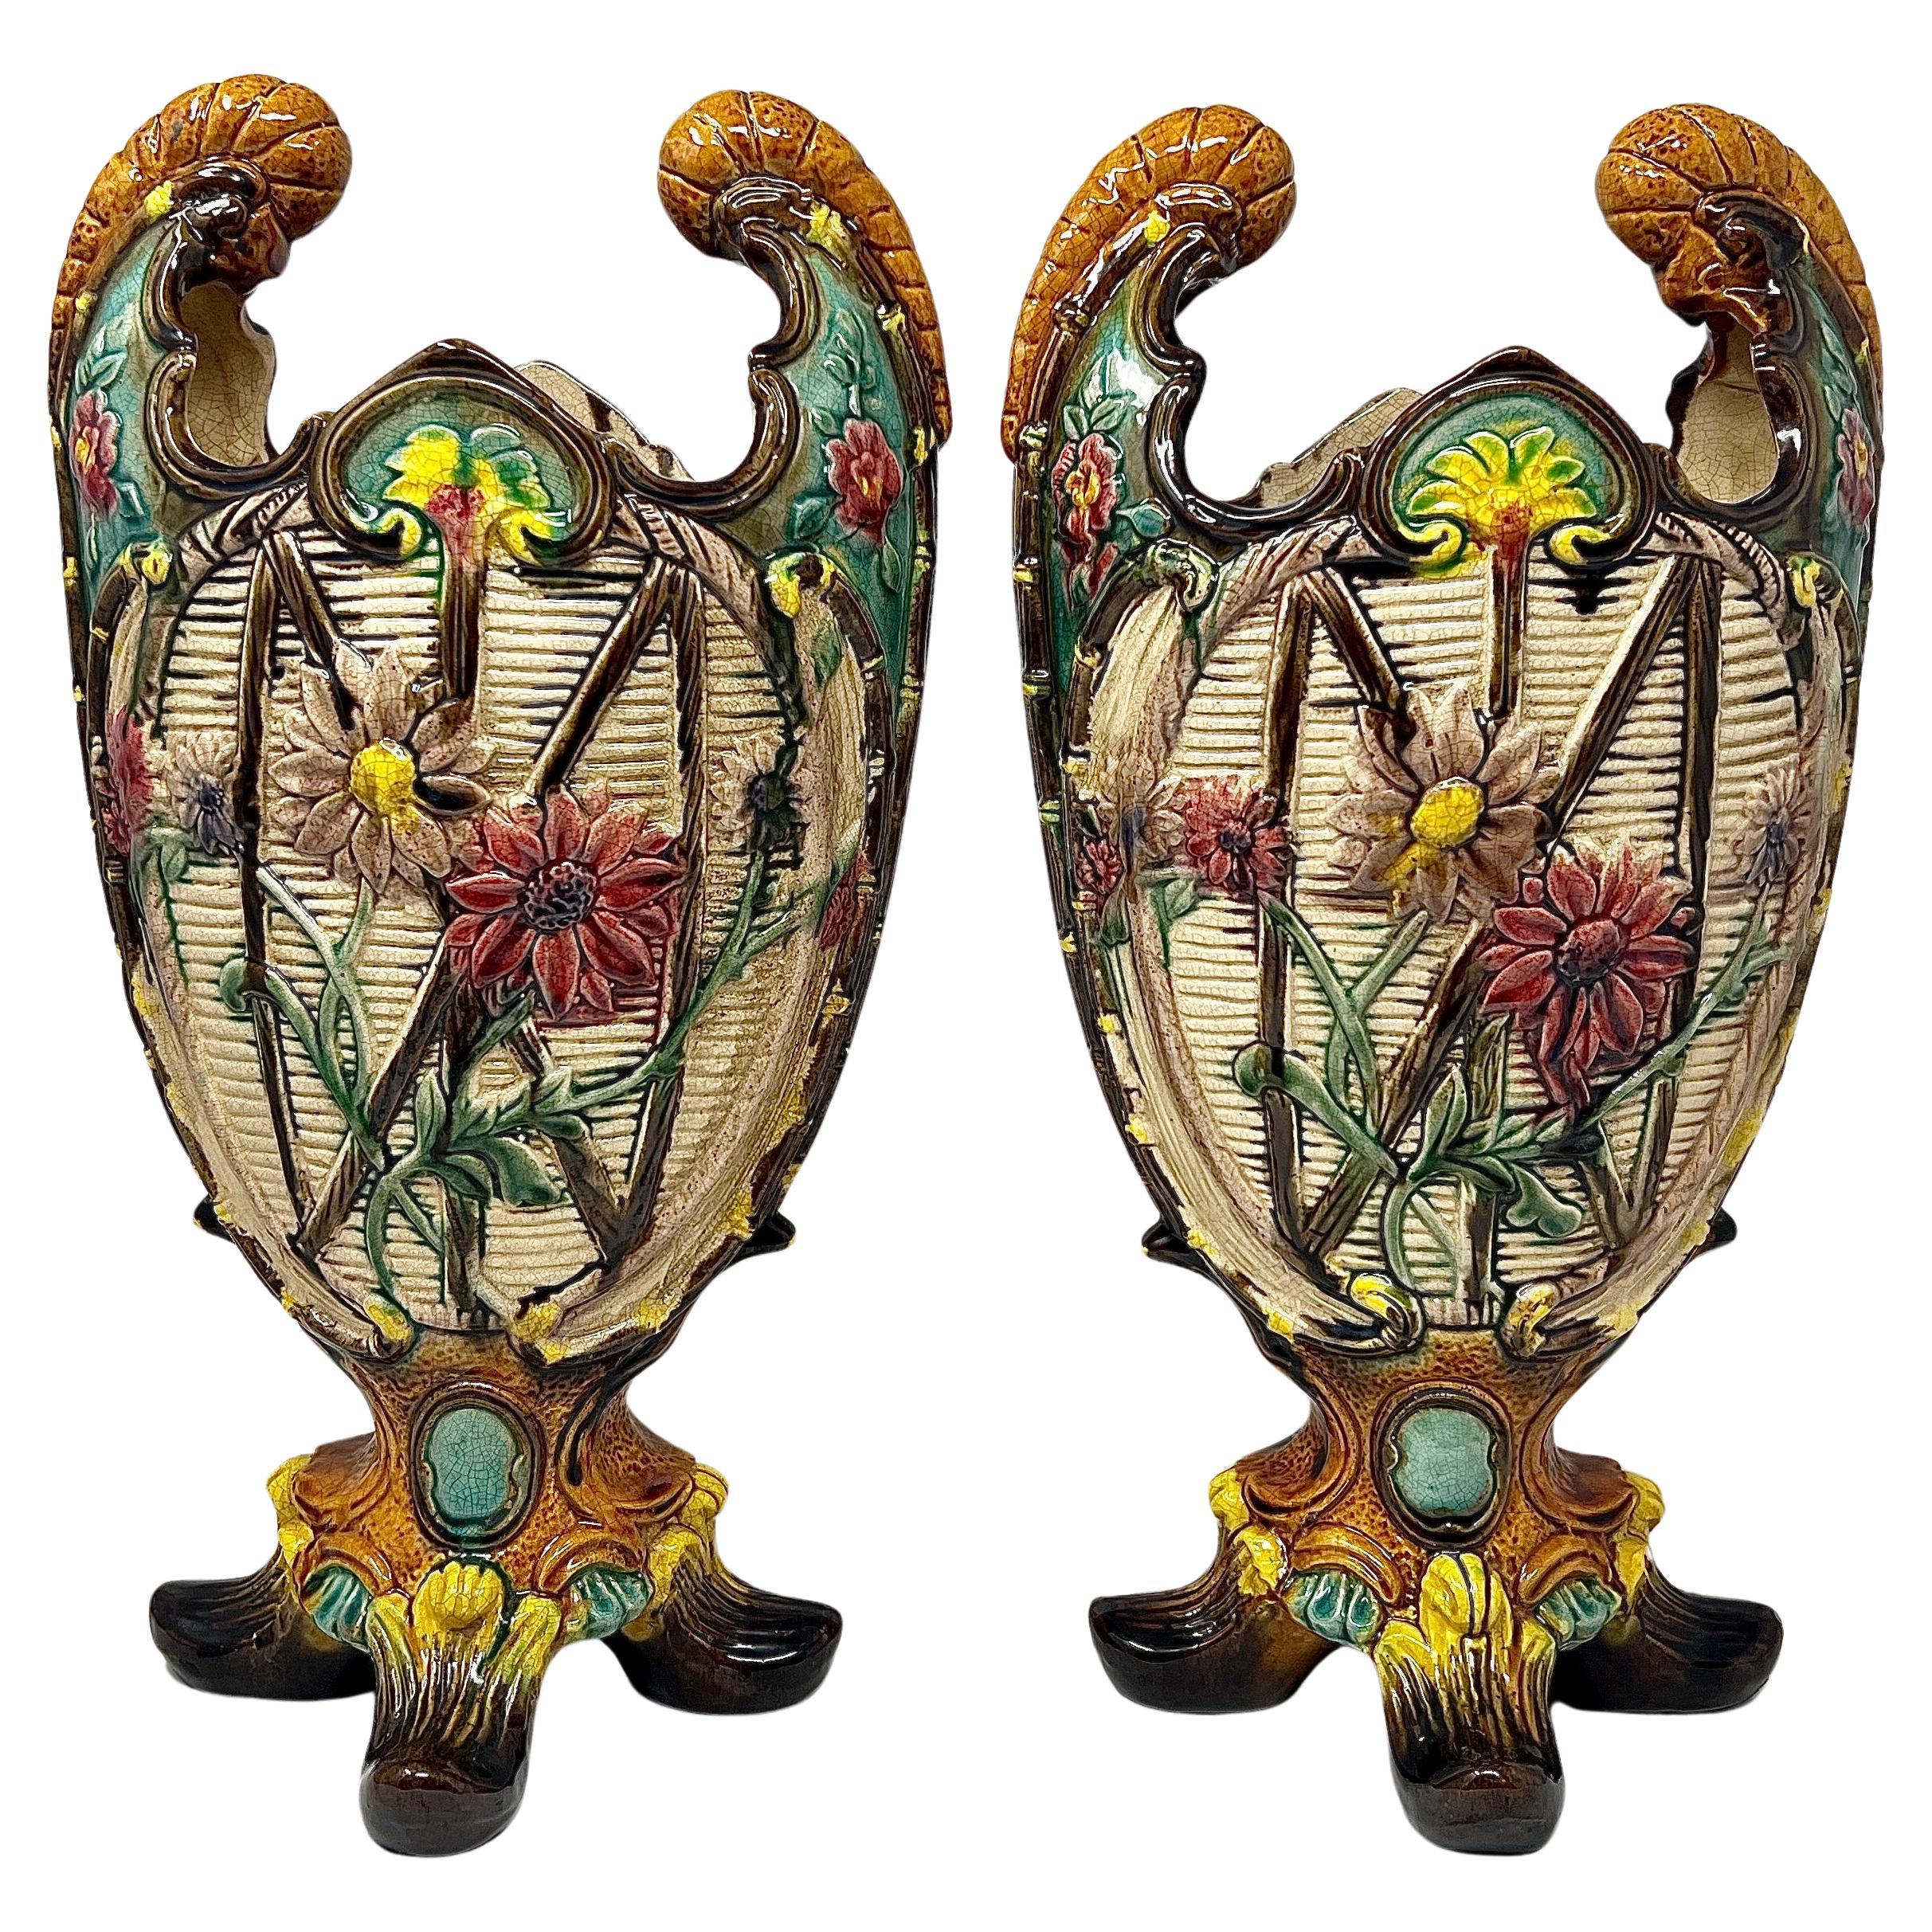 Pair Antique French Majolica Porcelain Multi-Colored Urns, Circa 1890.